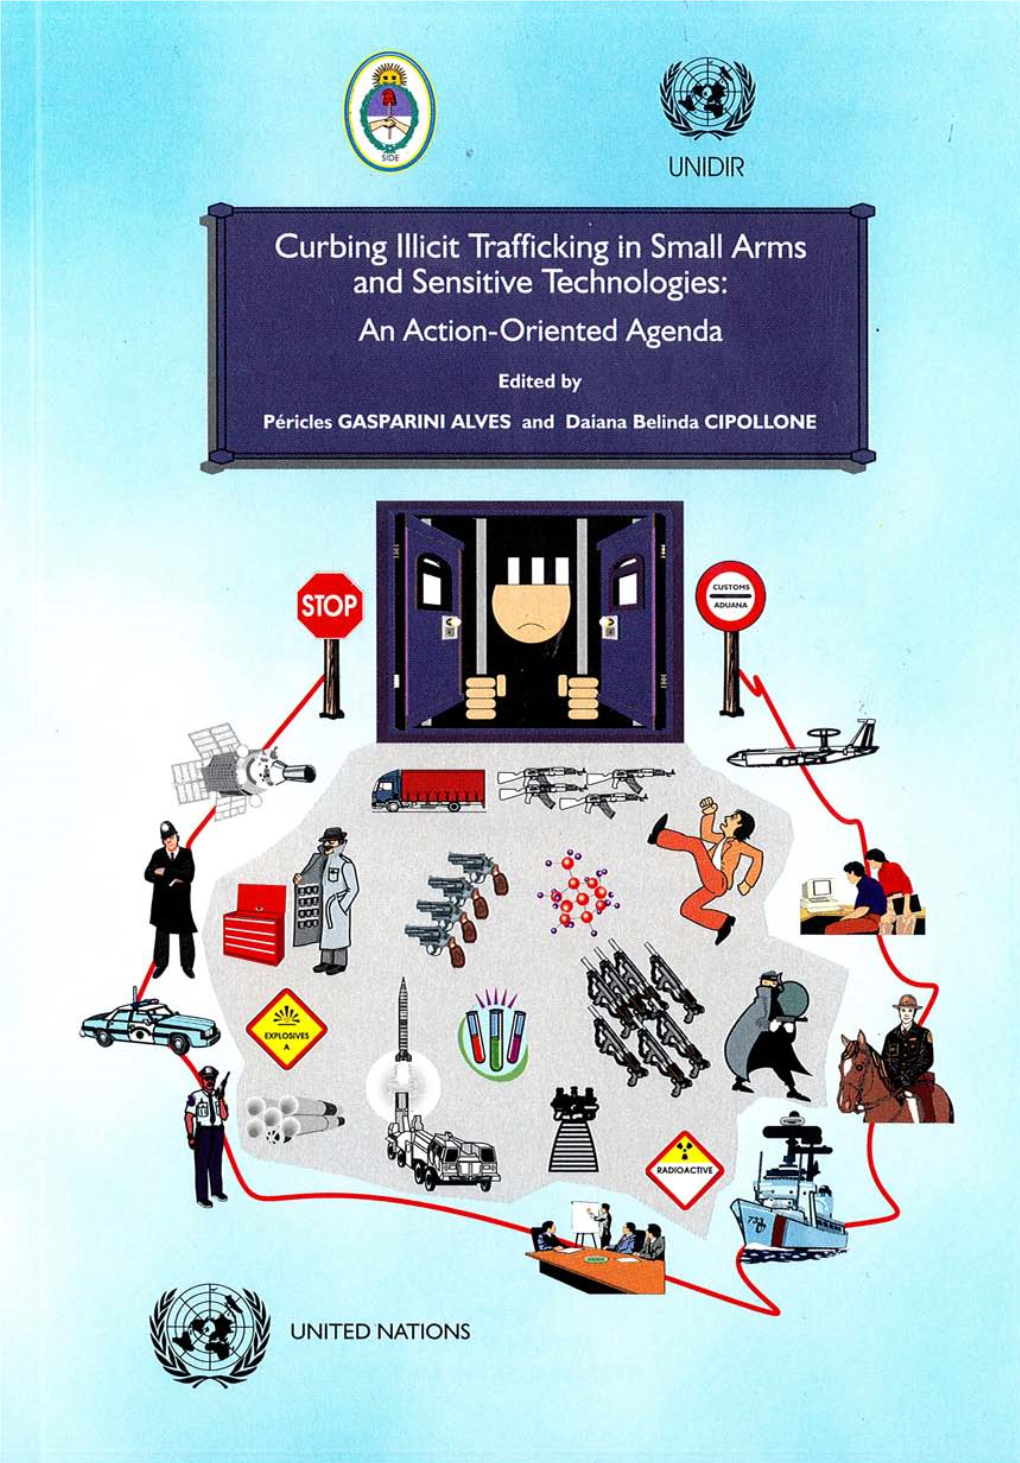 Curbing Illicit Trafficking in Small Arms and Sensitive Technologies: an Action-Oriented Agenda